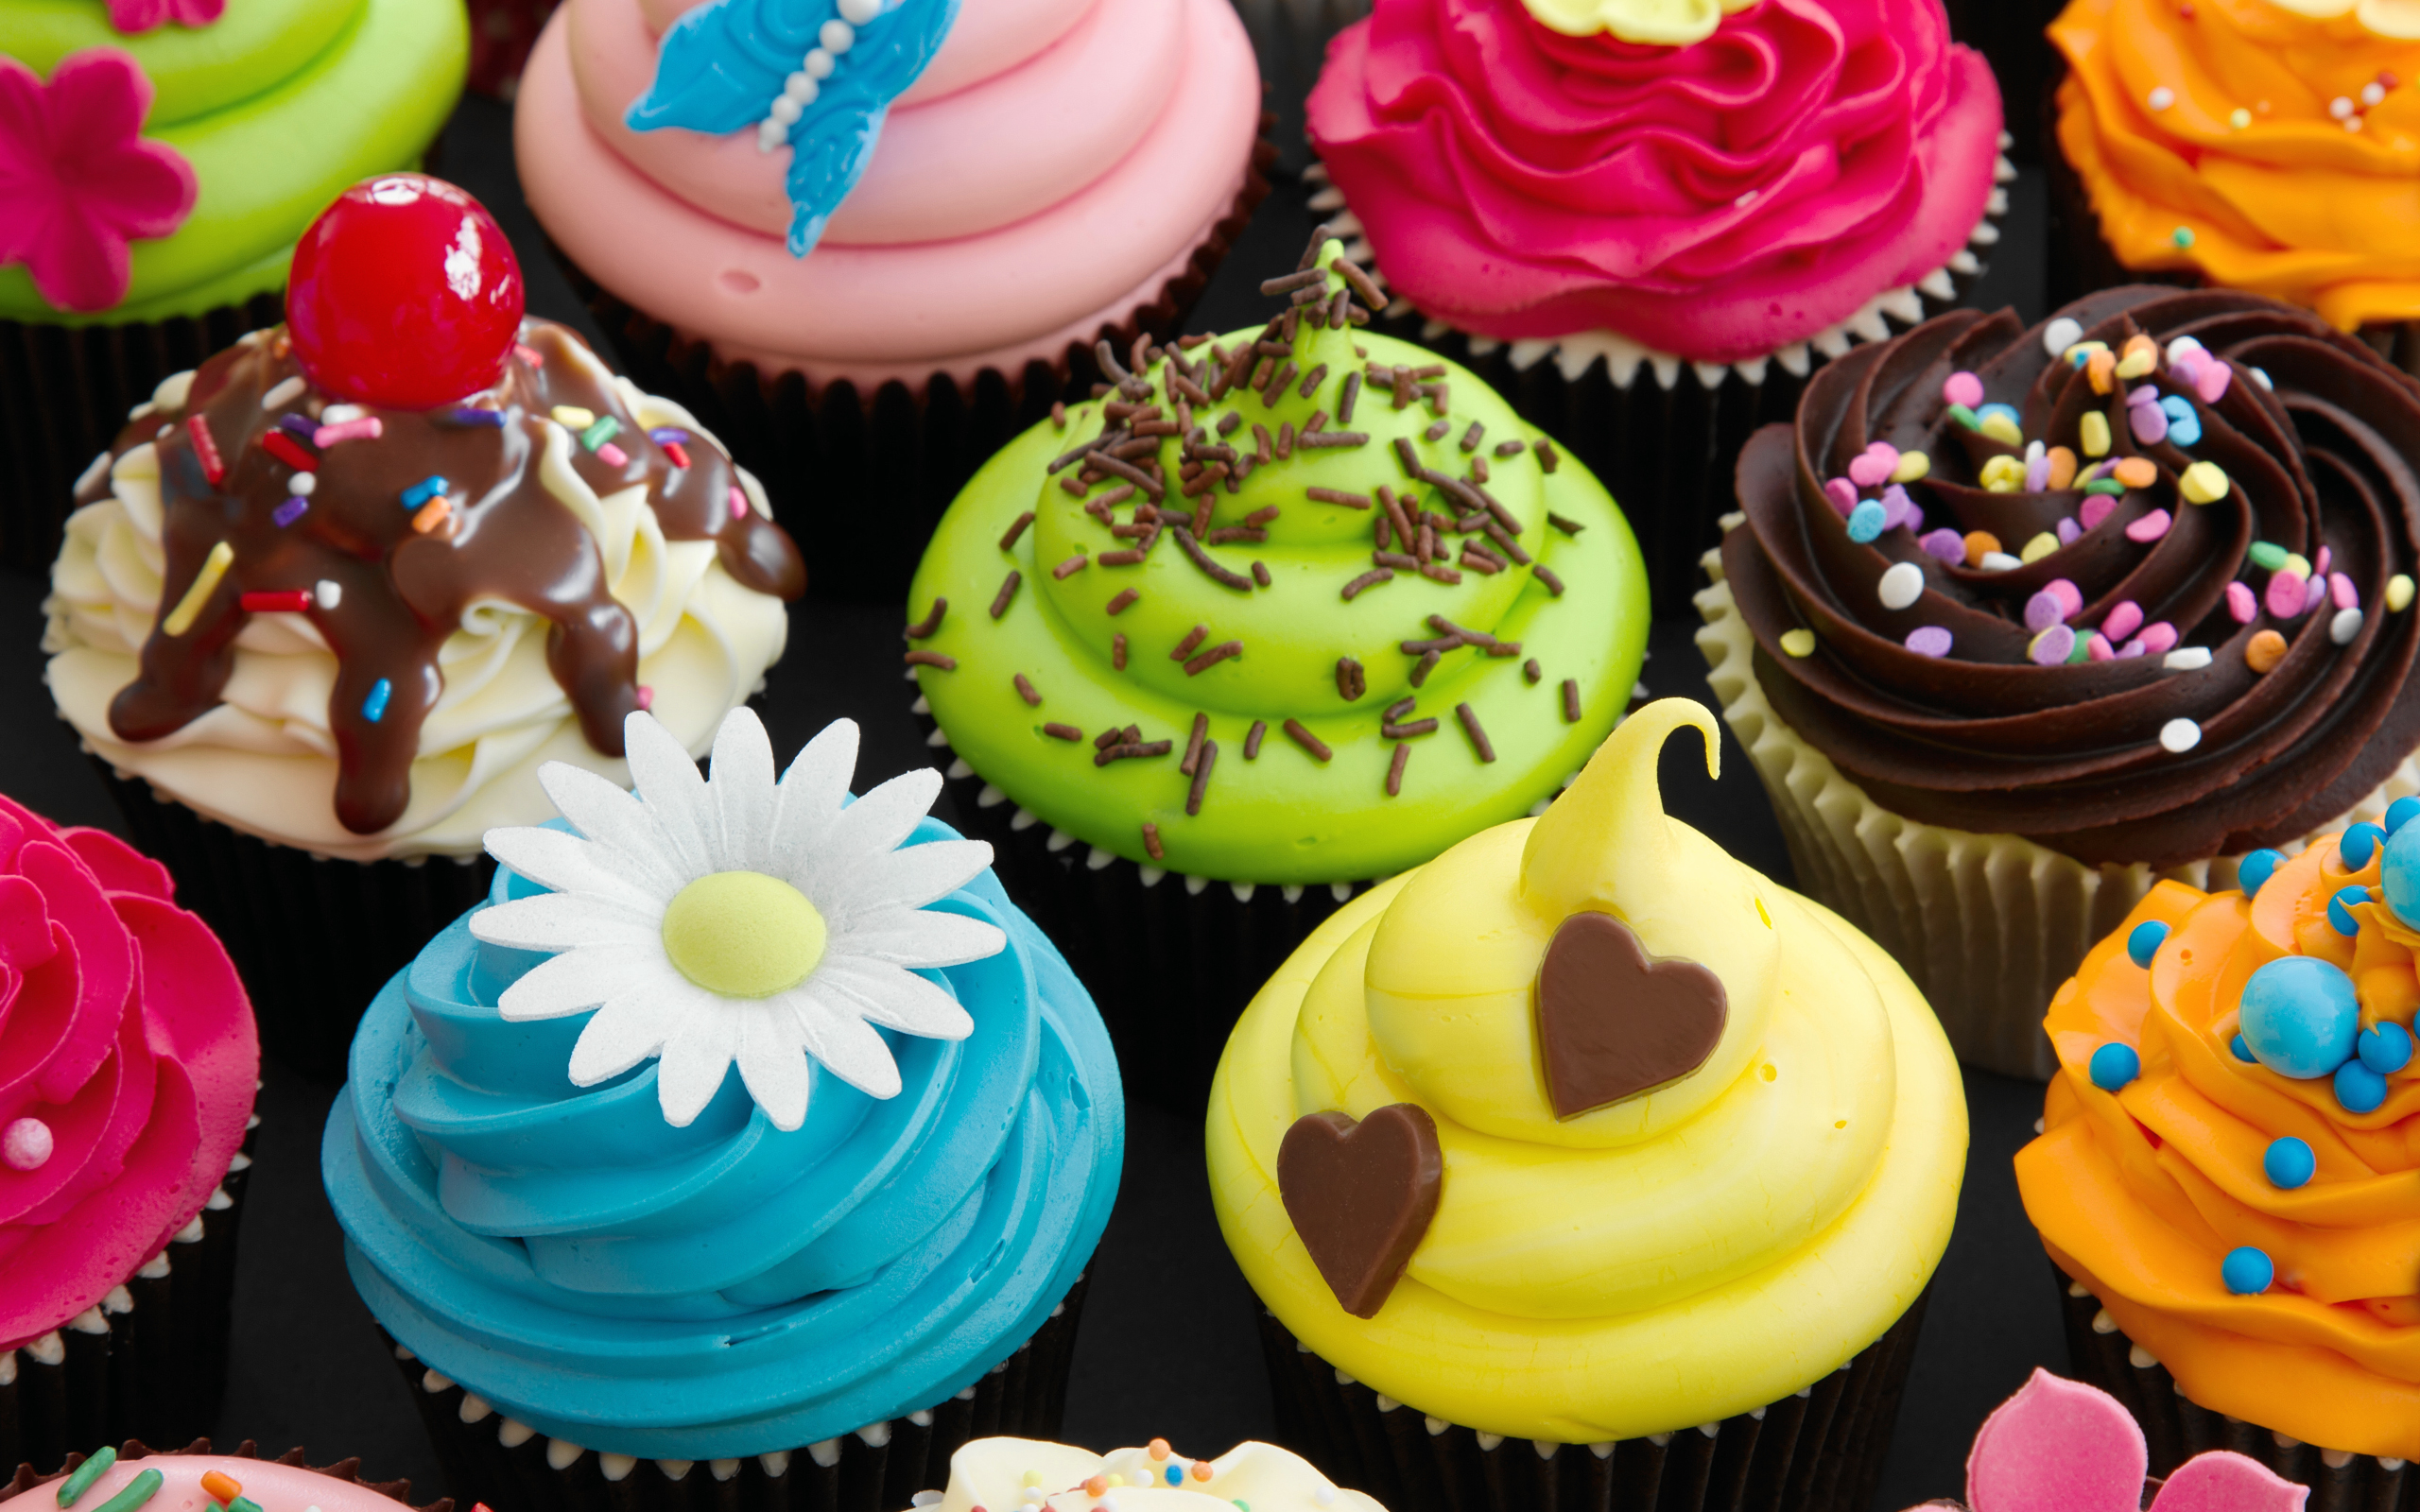 Colorful Little Cakes Wallpaper Id